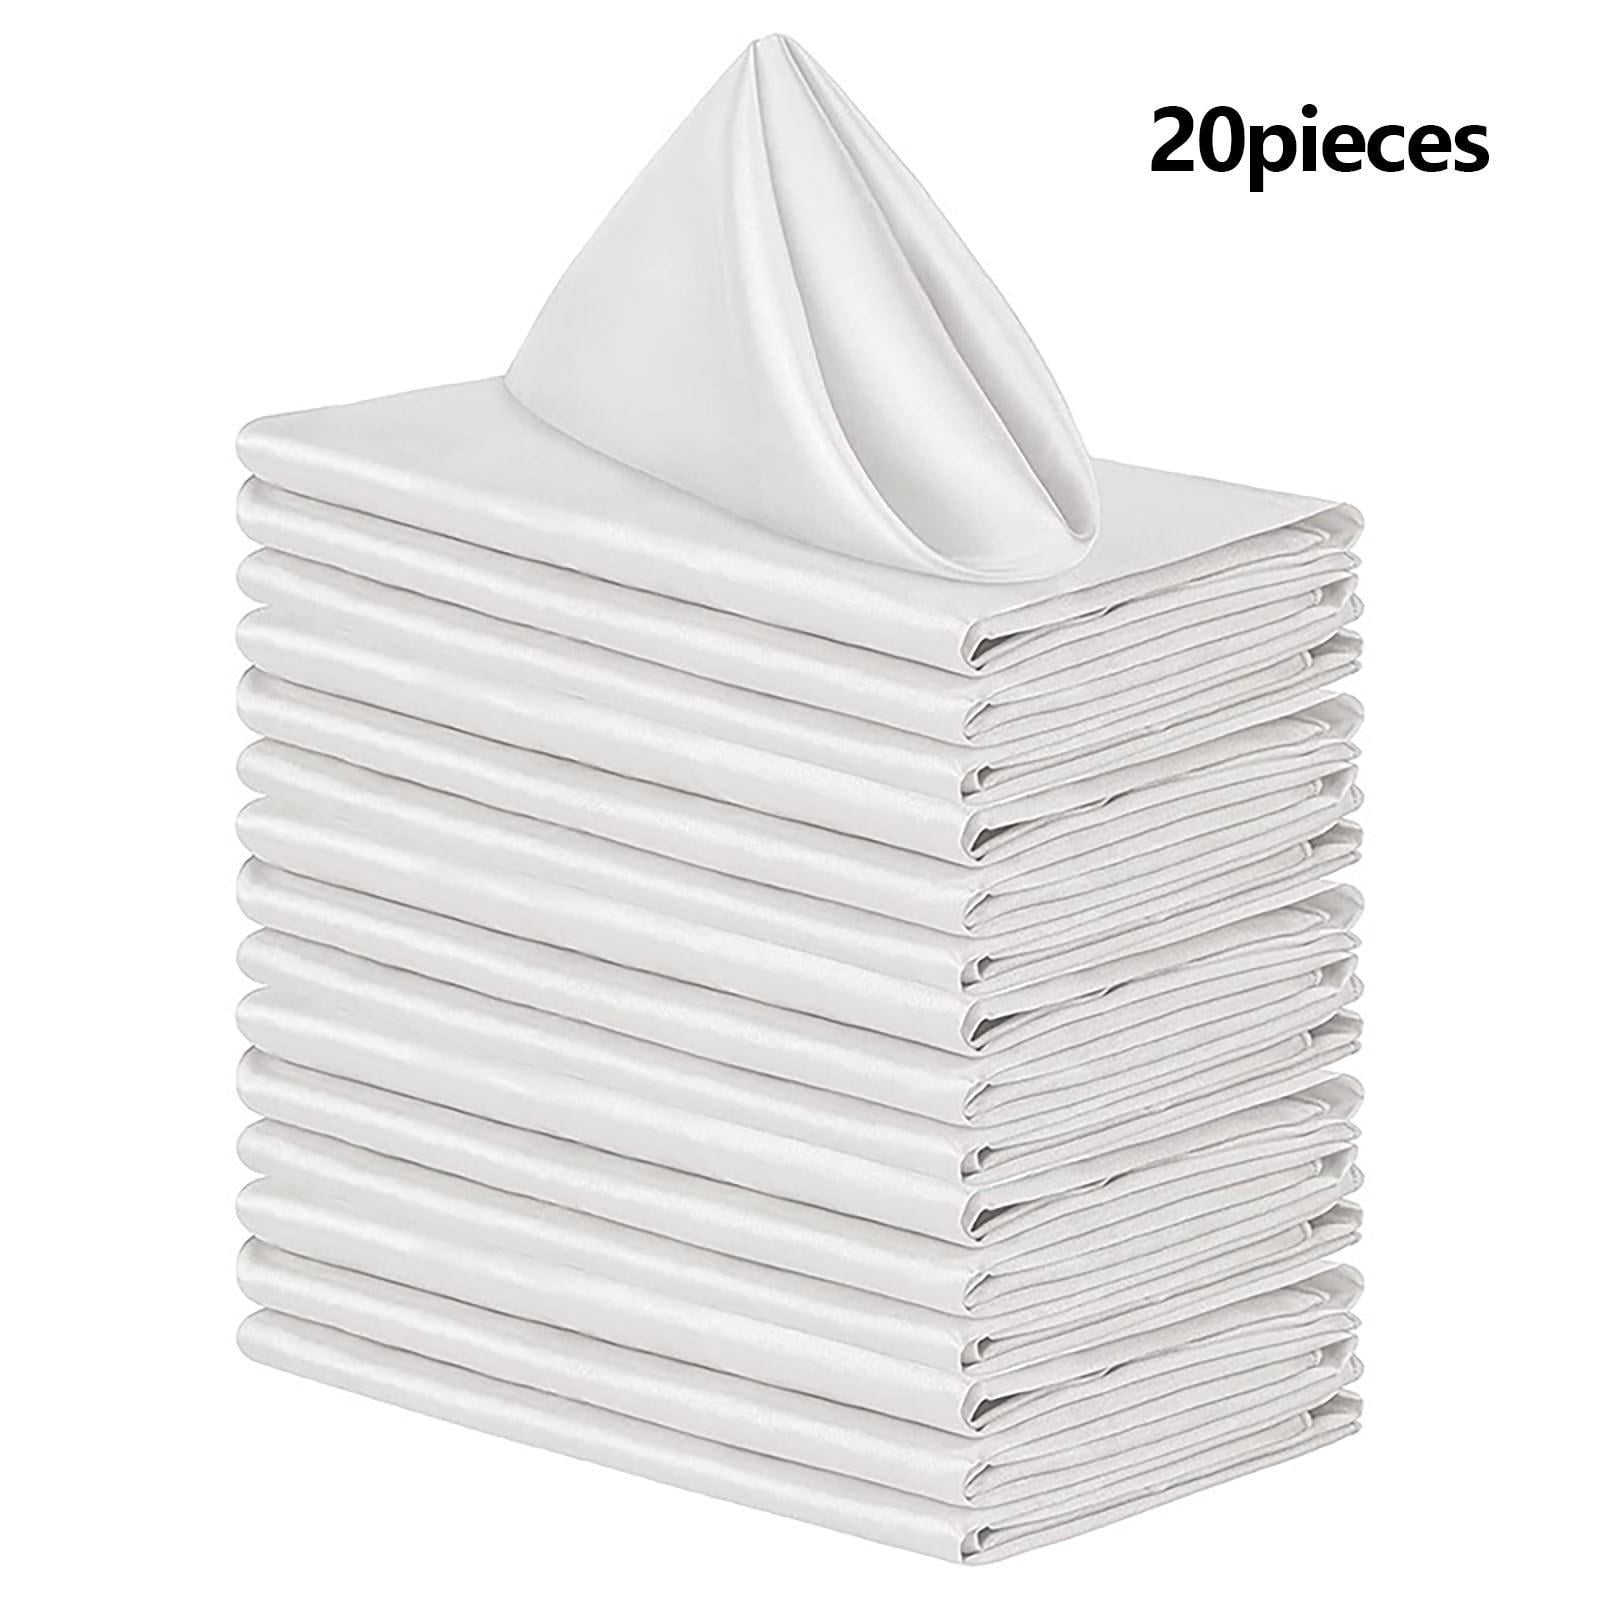 Preboun 24 Pcs Christmas Cloth Napkins 17 x 17 Inch Polyester Square Double  Folded Cloth Napkins Set of 24 with Hemmed Edges for Dinner Lunch